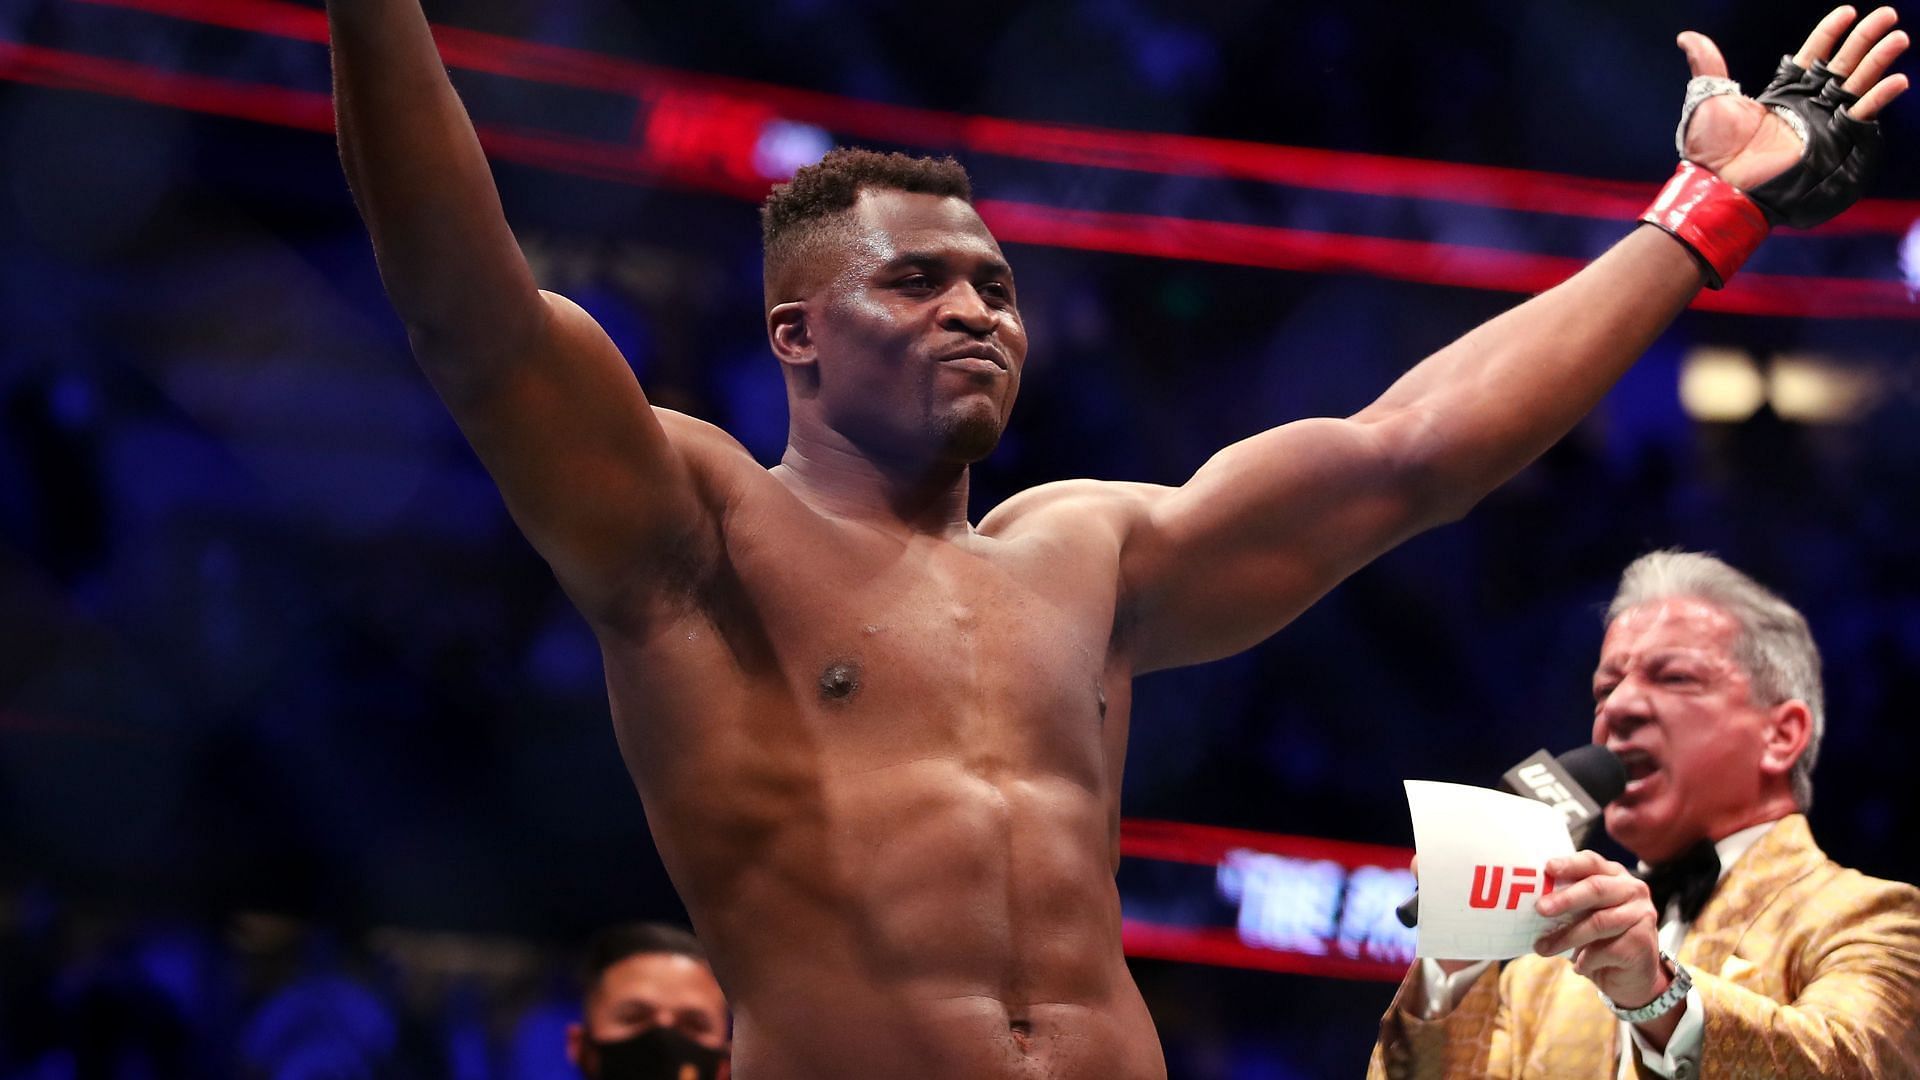 Francis Ngannou signs for Professional Fighter